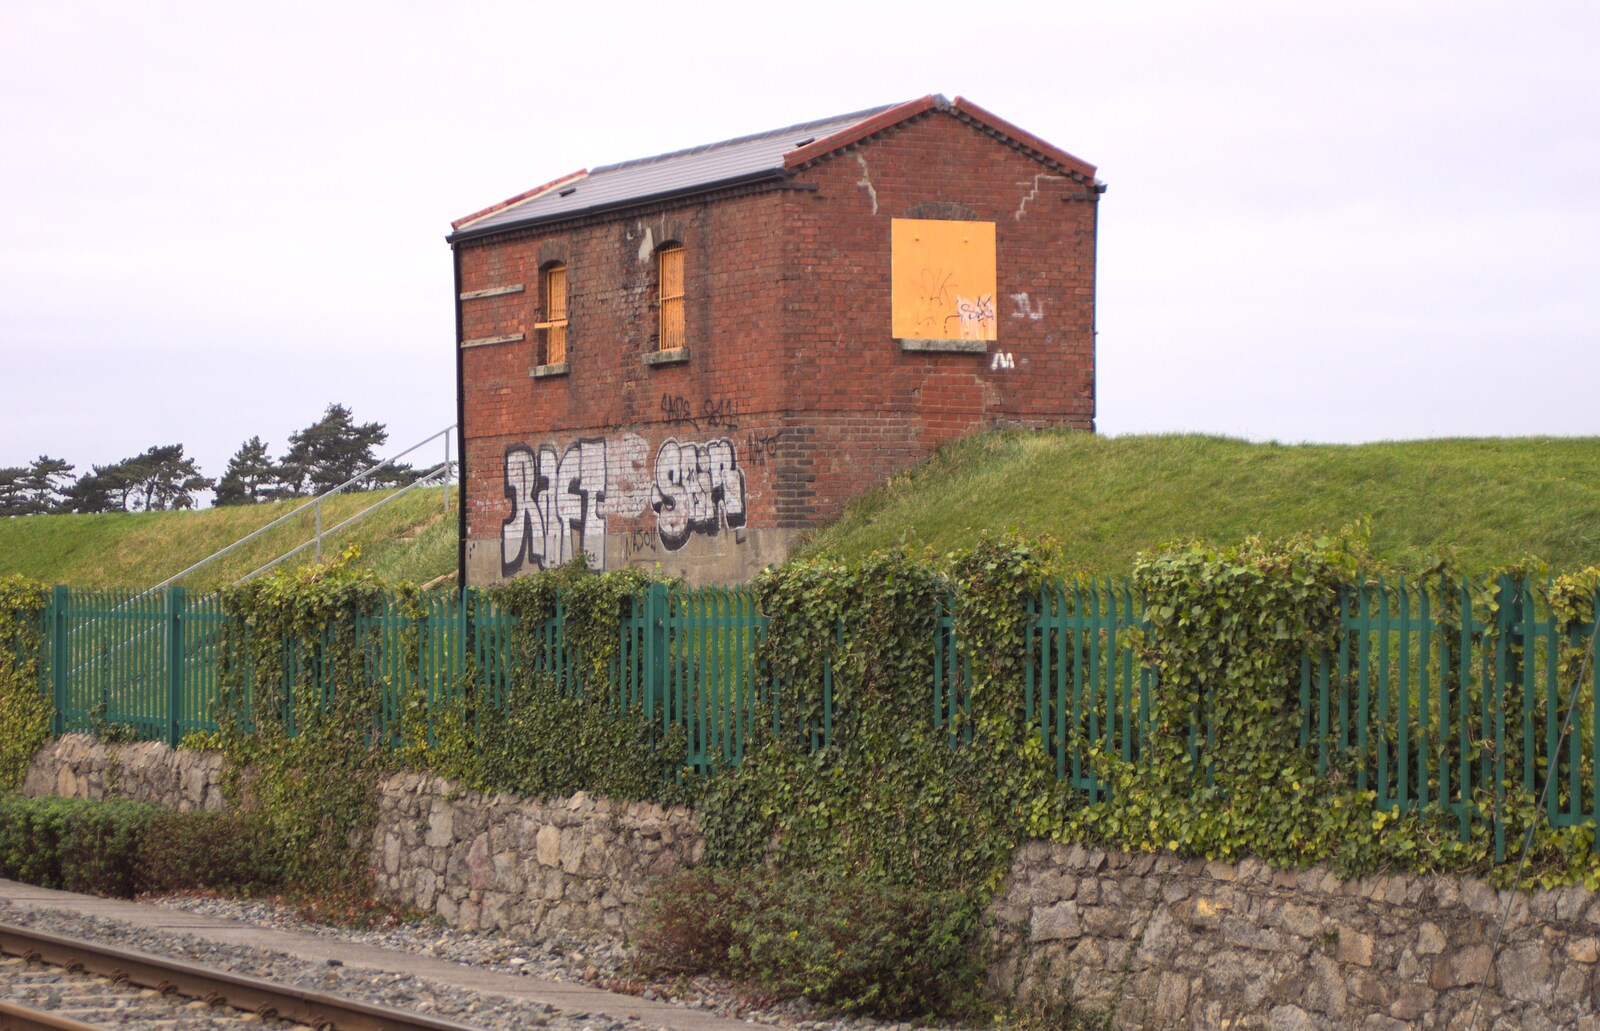 A Day in Dublin, Ireland - 7th January 2012: A derelict building